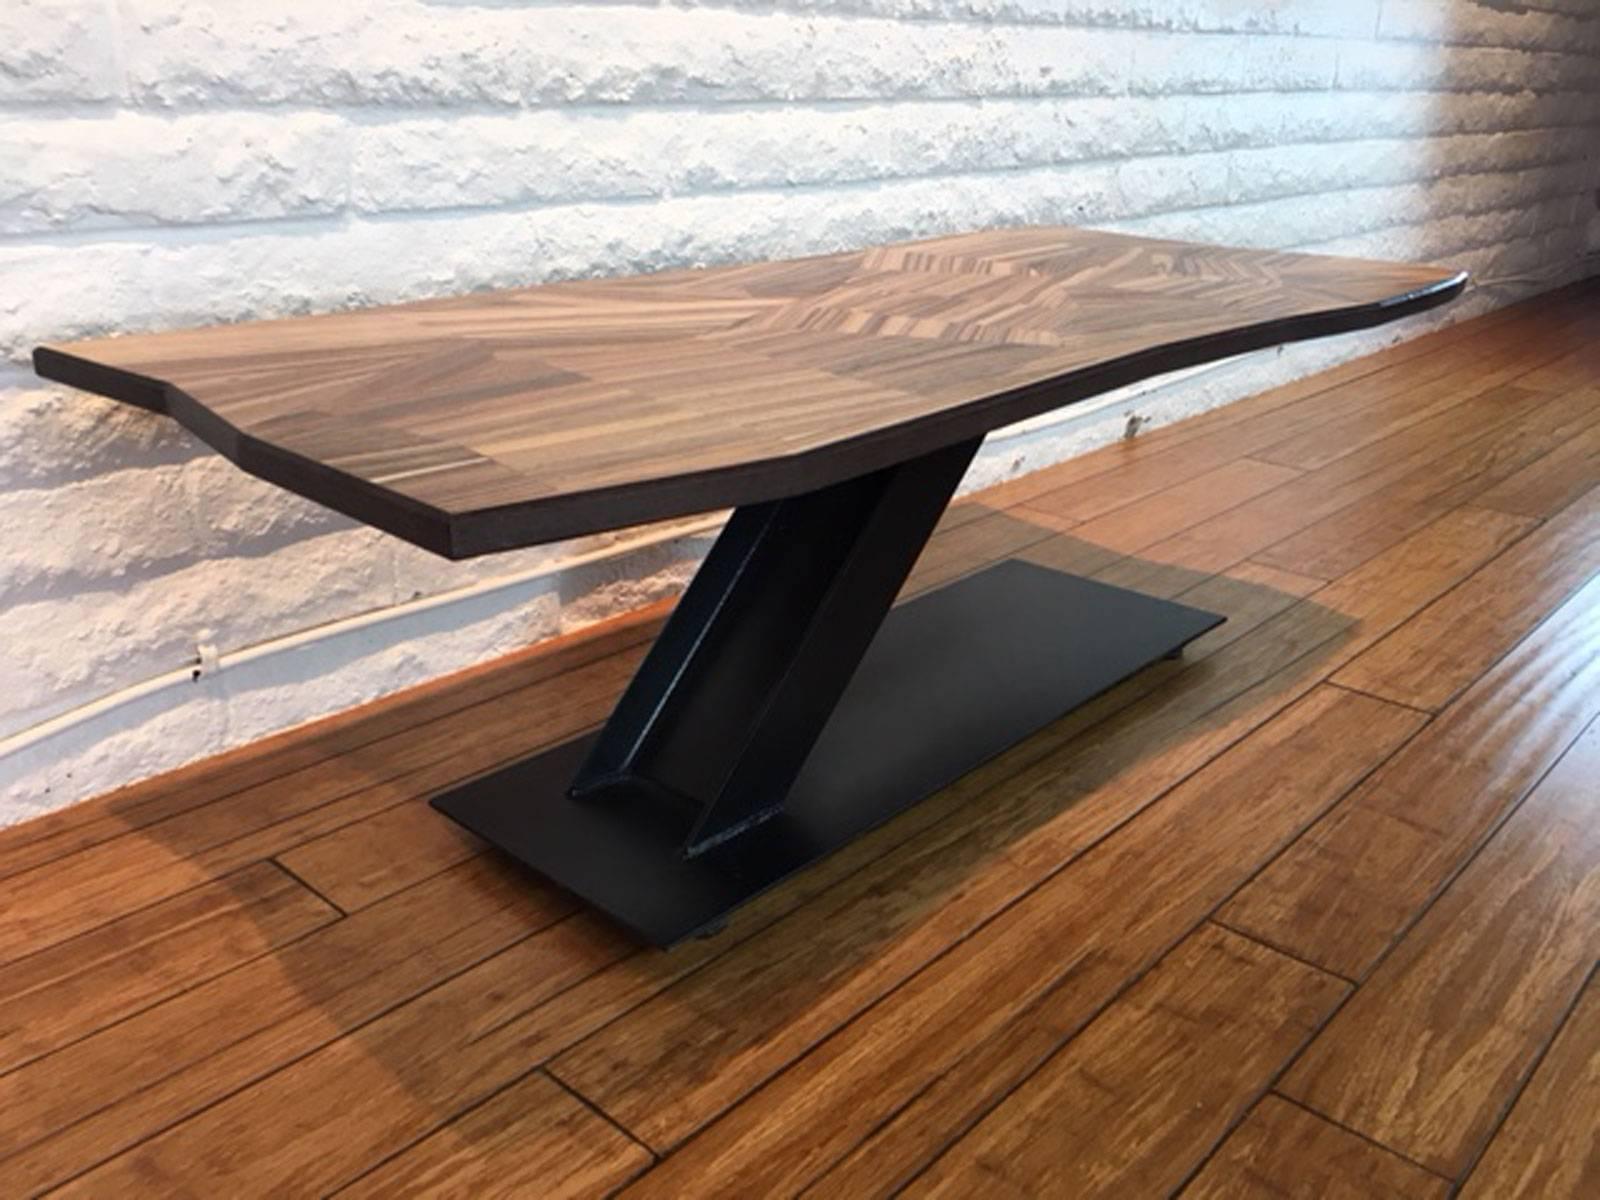 Iron and zebrawood coffee table designed, produced and made by master wood artist and designer Scott Mills who only uses reclaimed (deadfall or storm downed trees) in the pieces he designs and produces. Appropriate for home or commercial use. No